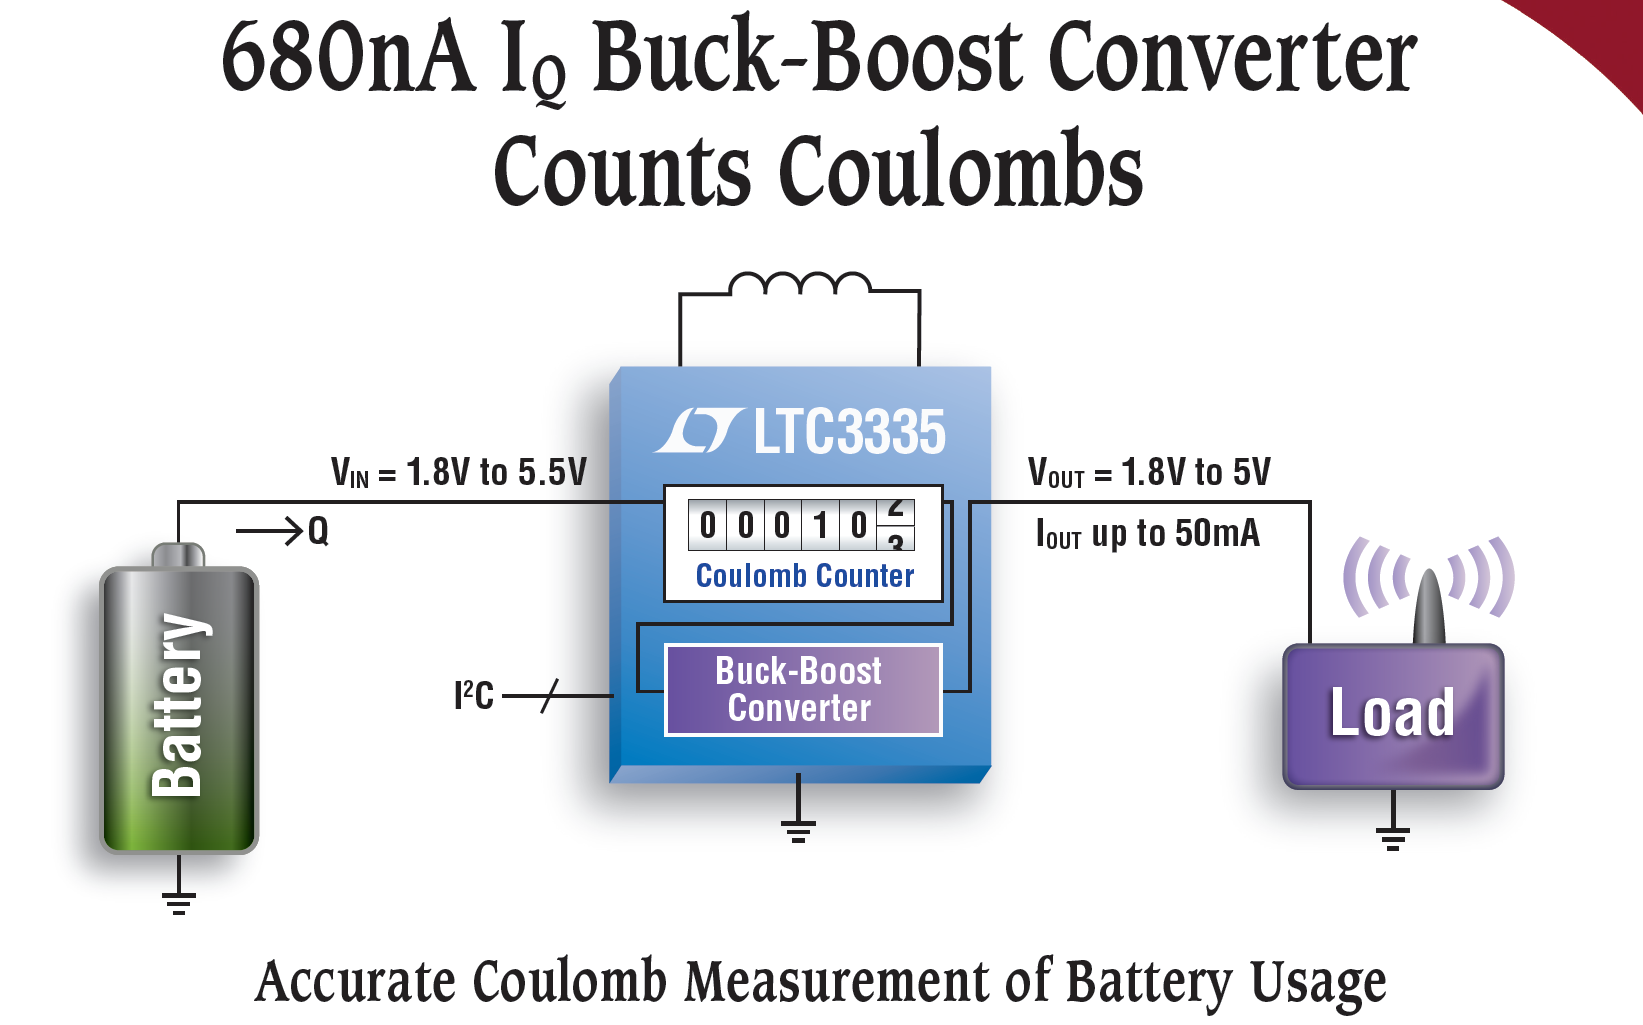 LTC3335 – Nanopower Buck-Boost DC/DC with Integrated Coulomb Counter